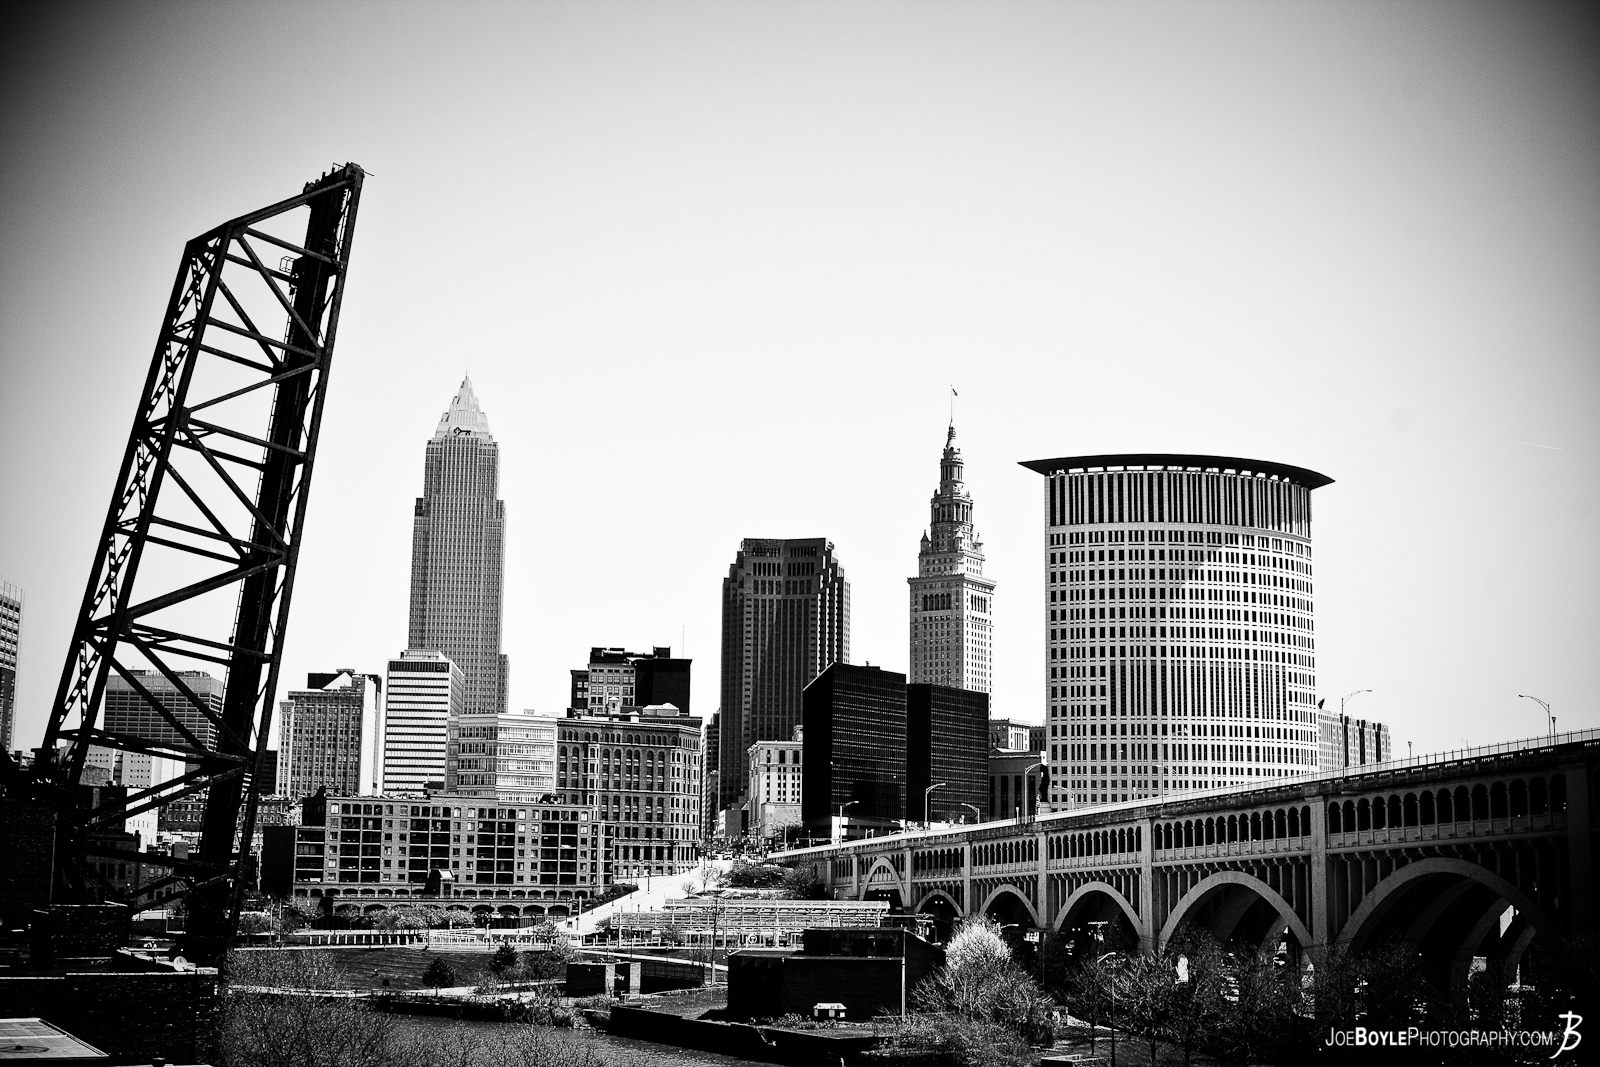  A photo of the Cleveland Skyline. From left to right the 4 tallest buildings are The Key Tower, The BP-Huntington Building, The Terminal Tower and the Federal Courthouse. 